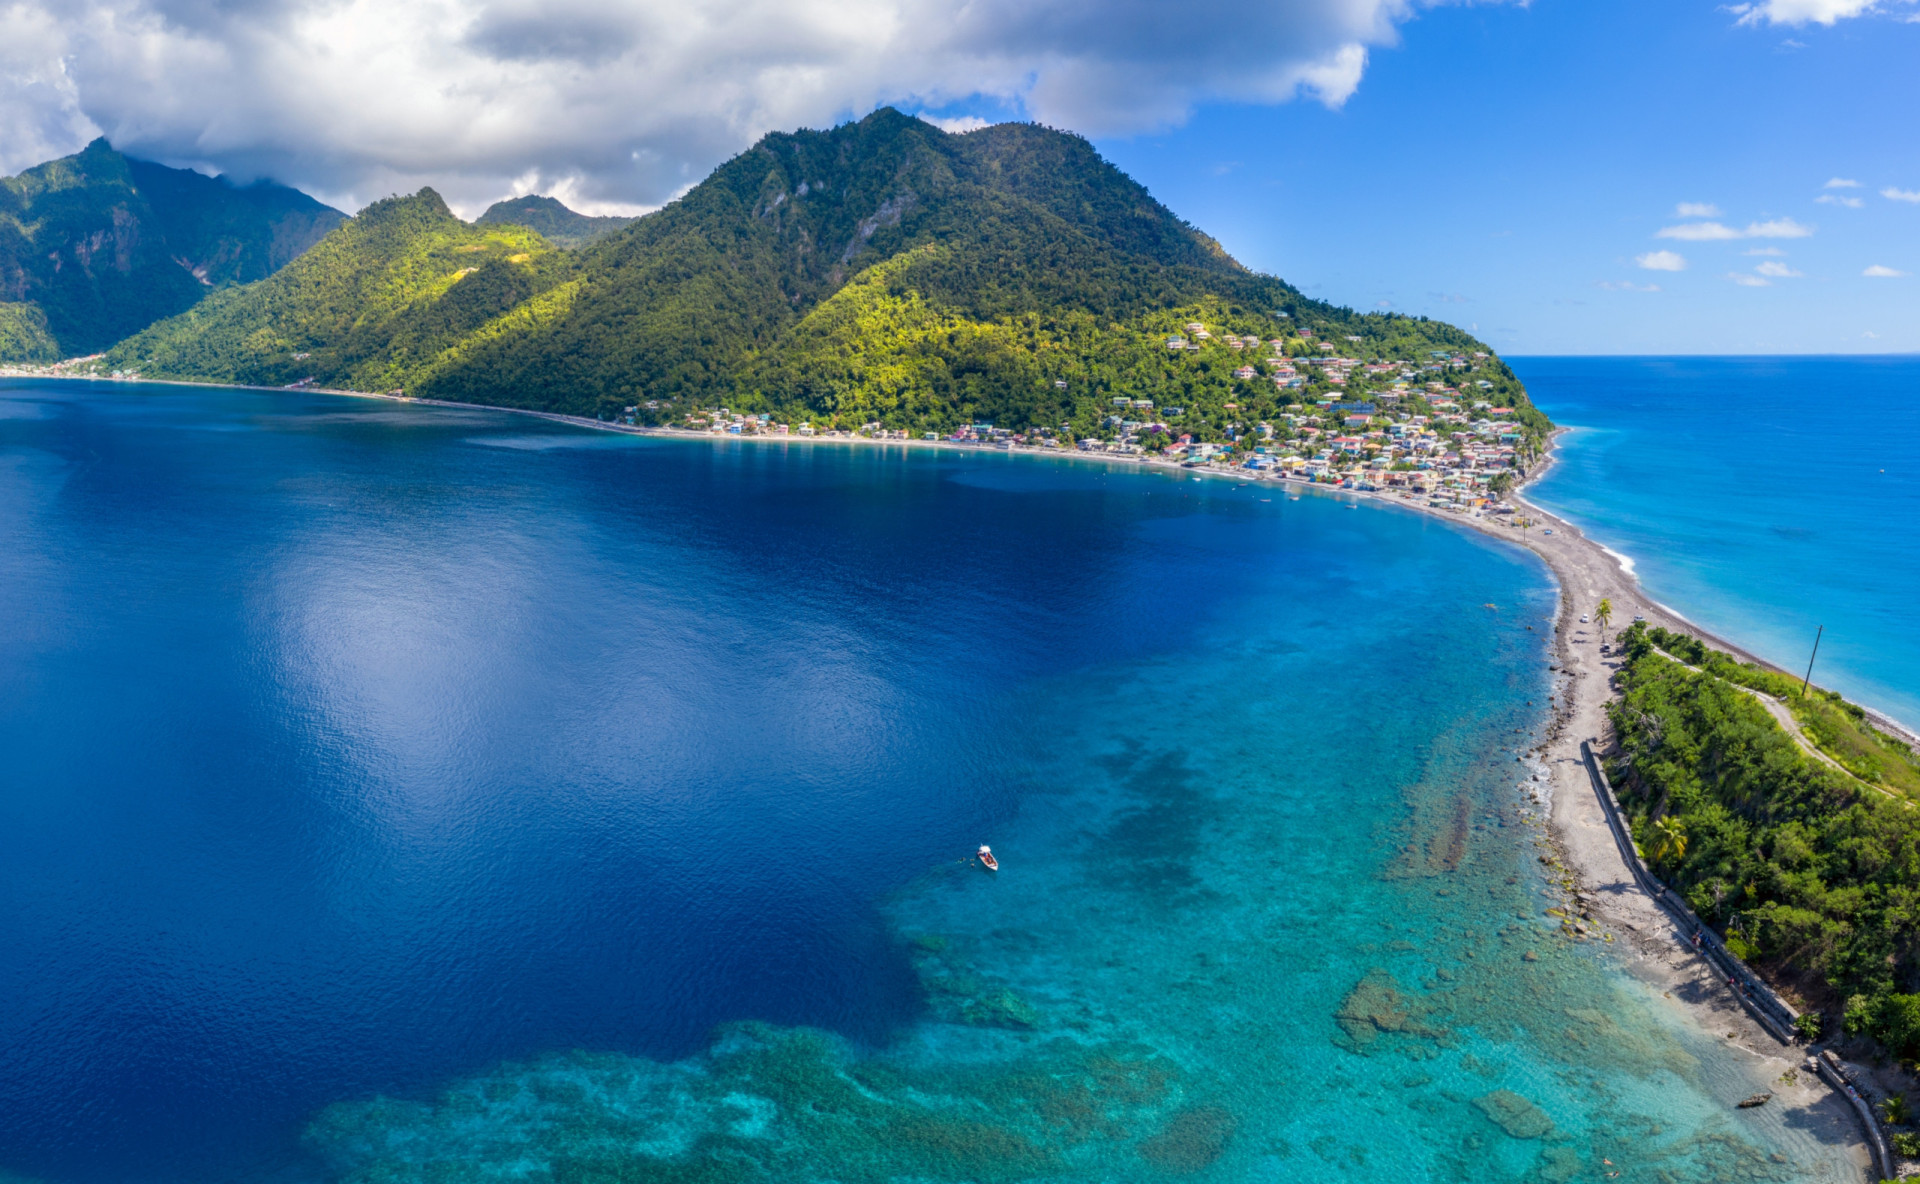 <p>Not to be confused with the Dominican Republic, the verdant island nation of Dominica is an ocean paradise blanketed with rainforest and textured by cascading waterfalls, hot springs, and golden sand. Its eco-friendly hotels and resorts are the envy of the region.</p>